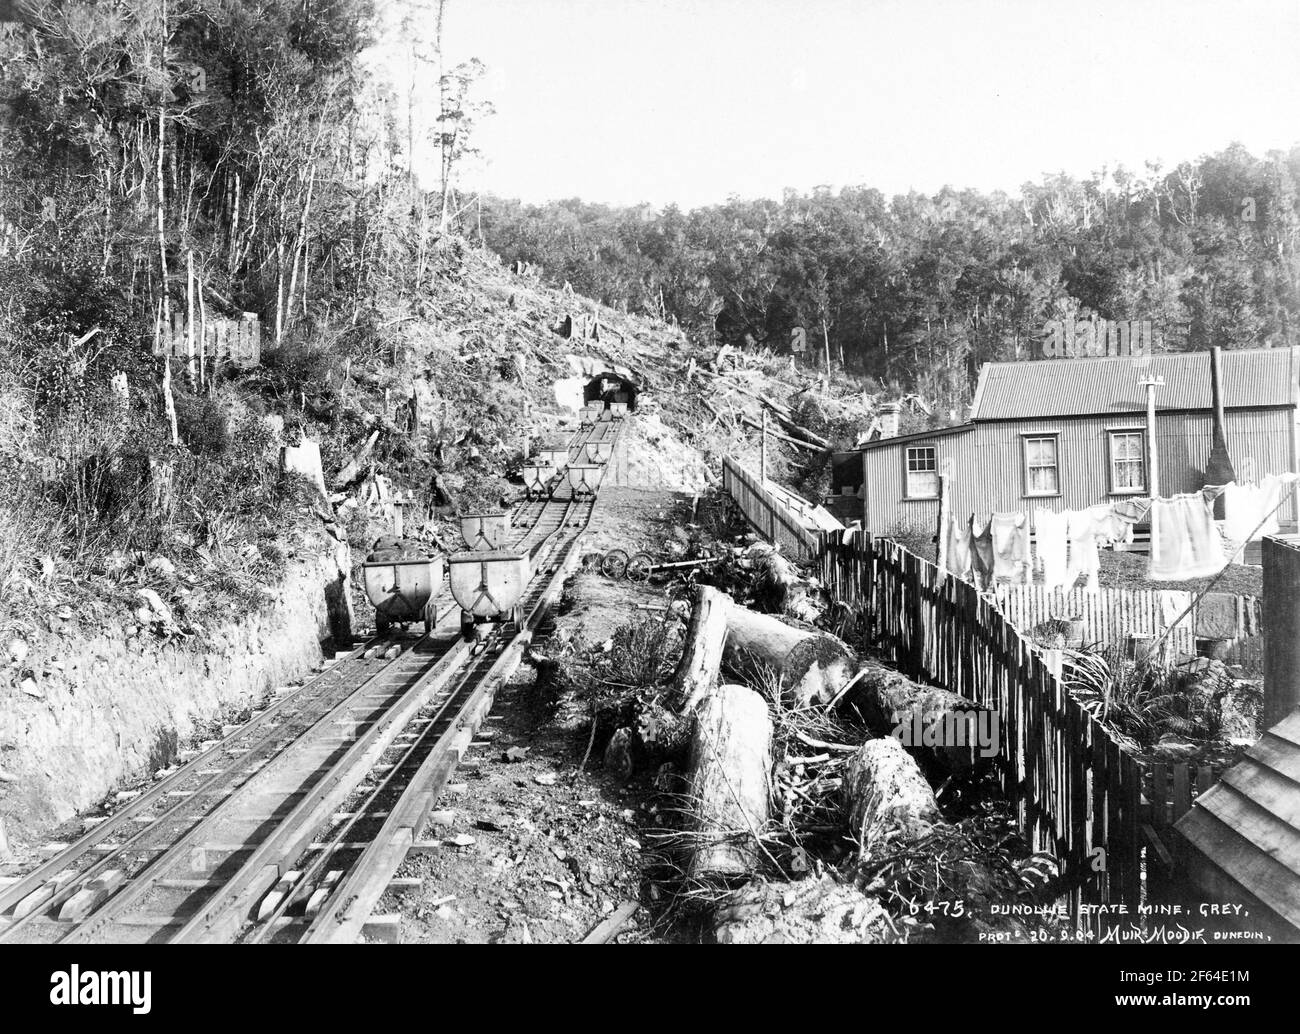 Coal wagons on the railway incline at the entrance to Dunollie coal mine, New Zealand, circa 1910. Photo by Muir Moodie of Dunedin Stock Photo